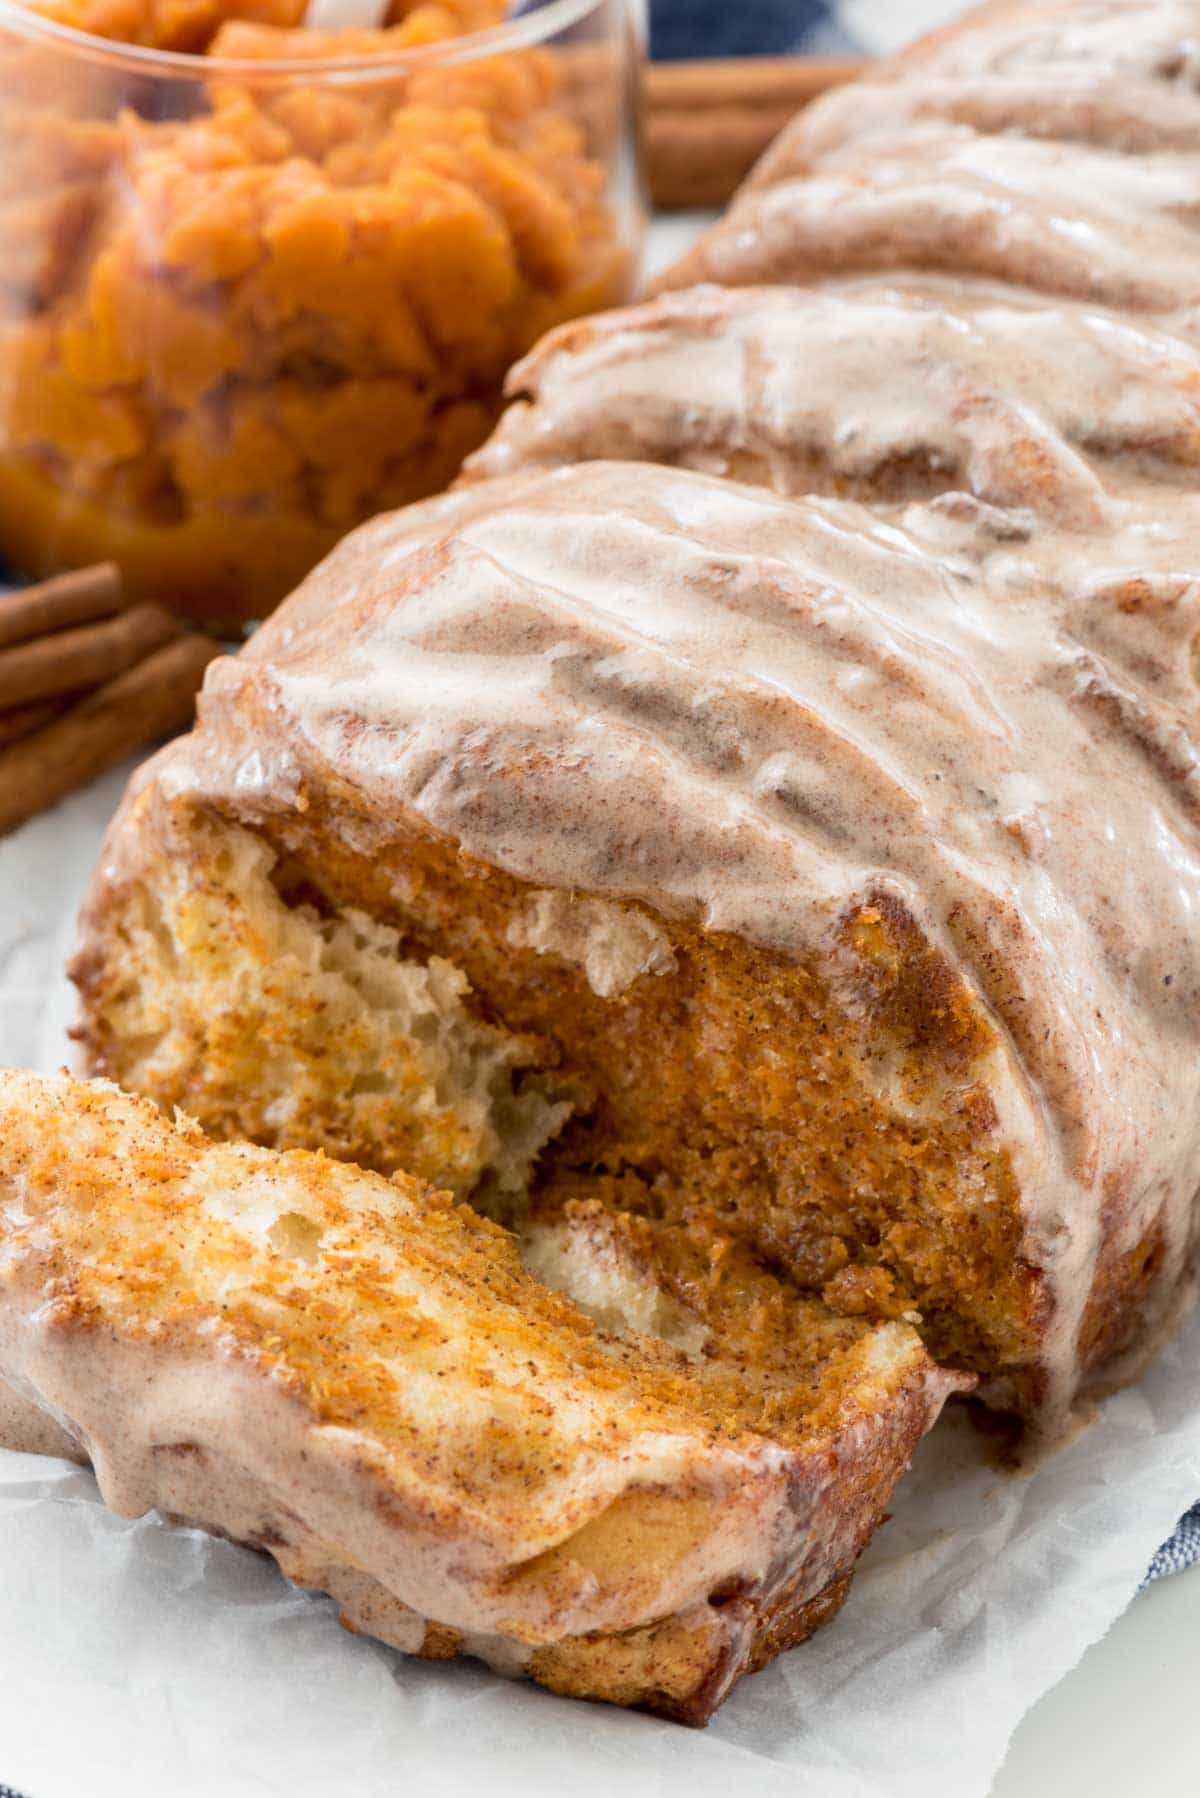 Easy Pumpkin Pull Apart Bread - this is the perfect pumpkin recipe! Refrigerated biscuits filled with pumpkin pie mixture - it's like pumpkin pie for breakfast!